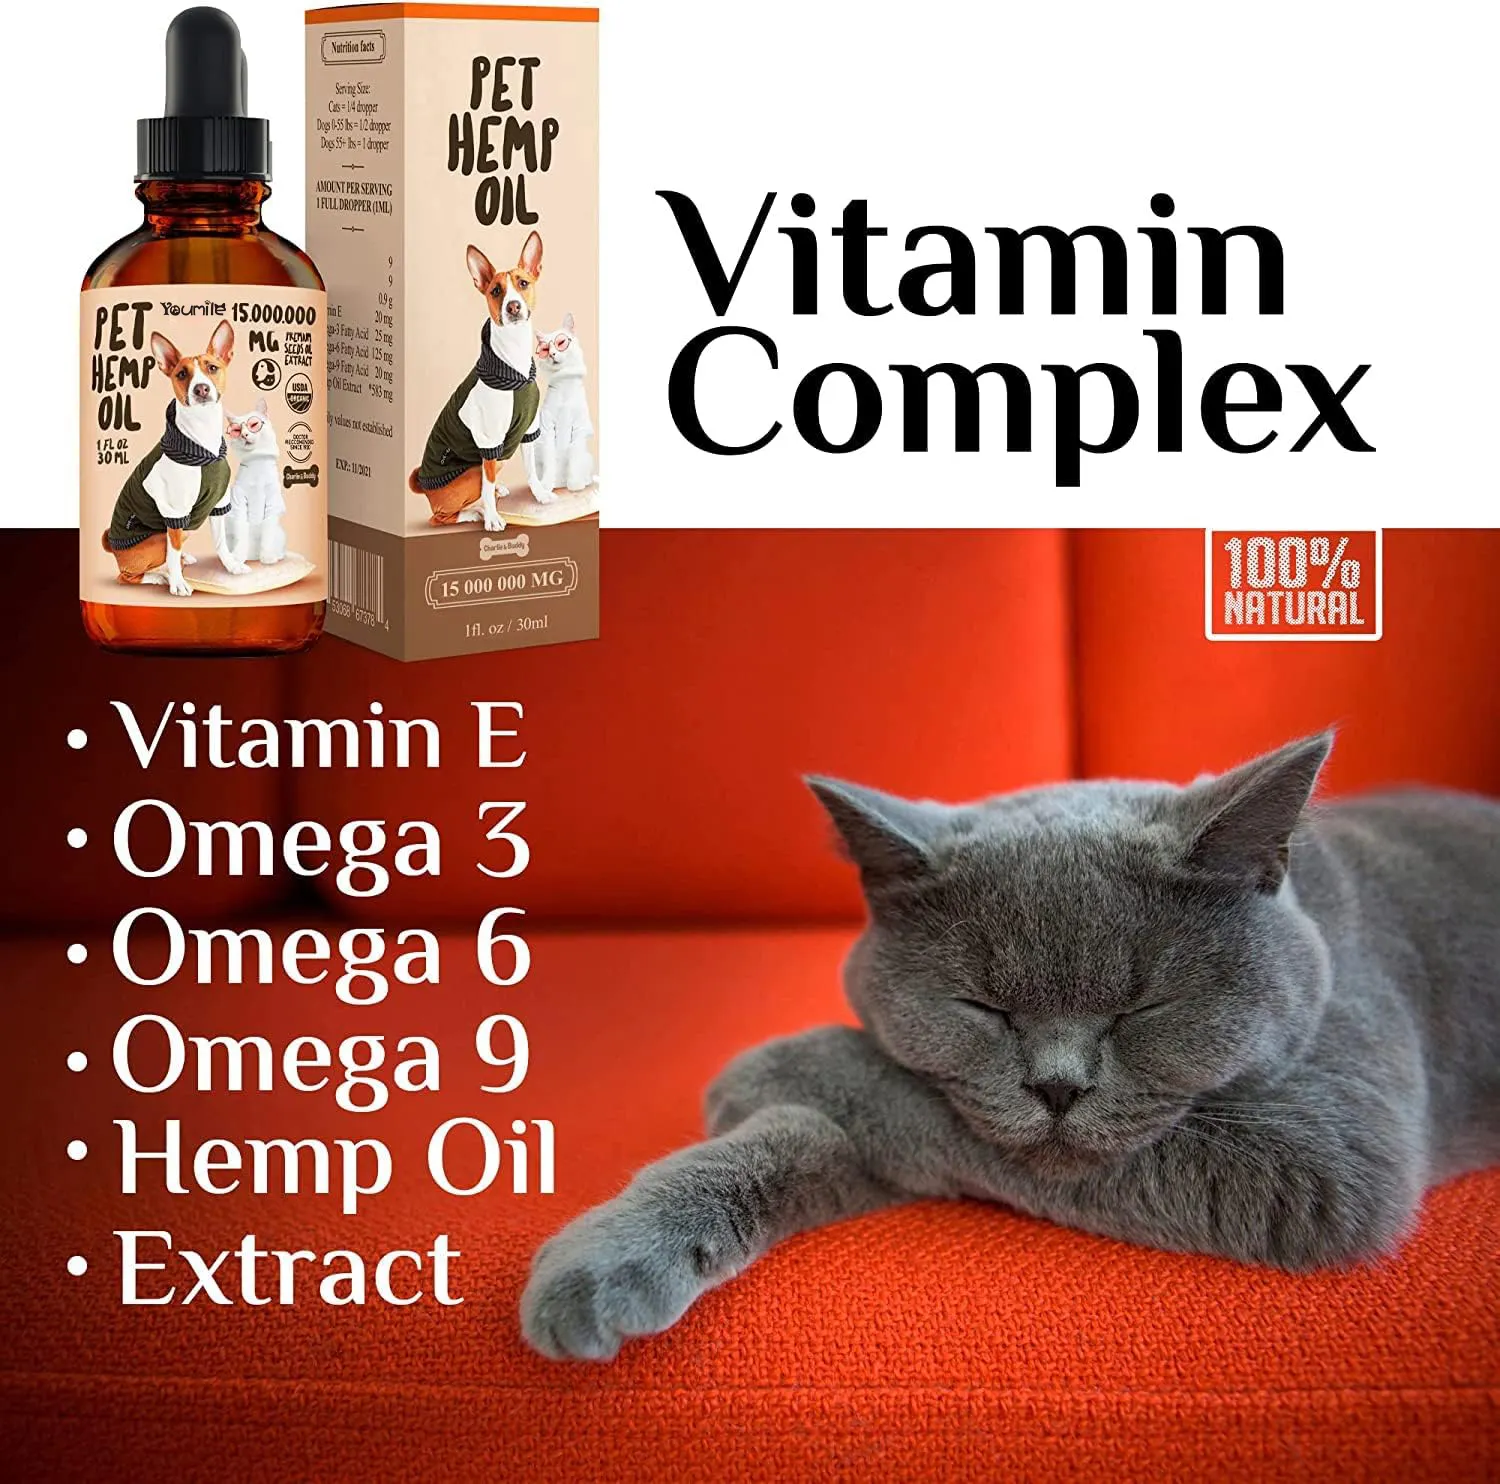 High Quality Pet Hemp Oil For Dogs And Cats Maximum Strength For Anti Stress Pain Holistic Inflammation